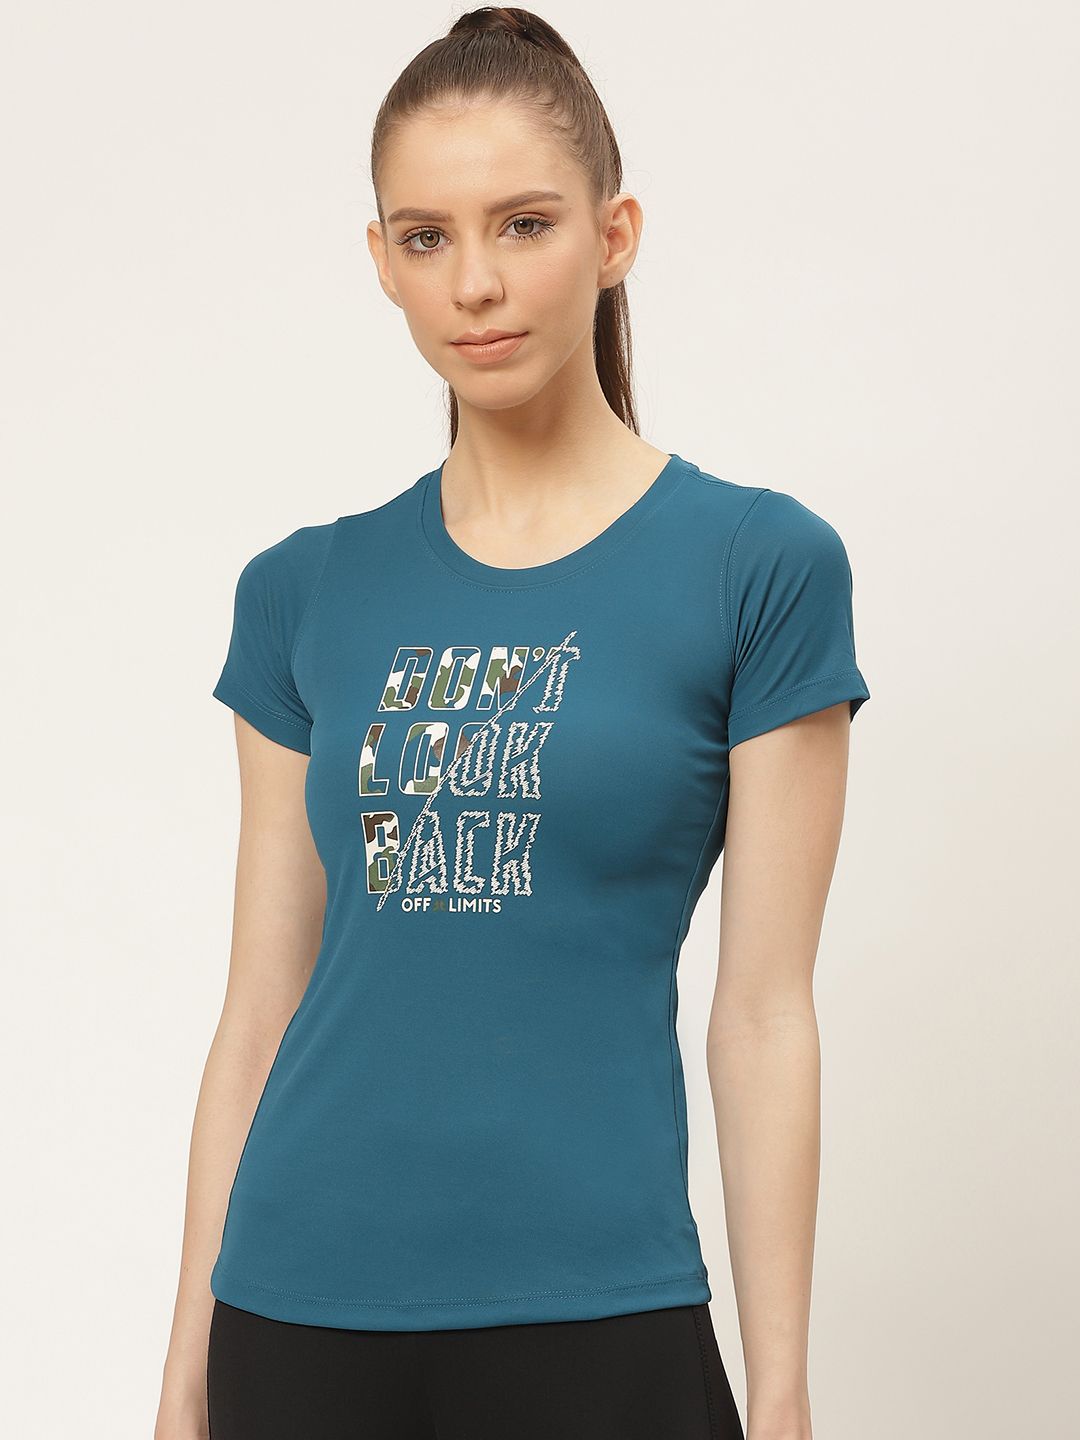 OFF LIMITS Women Teal Blue & Off-White Printed Round Neck T-shirt Price in India